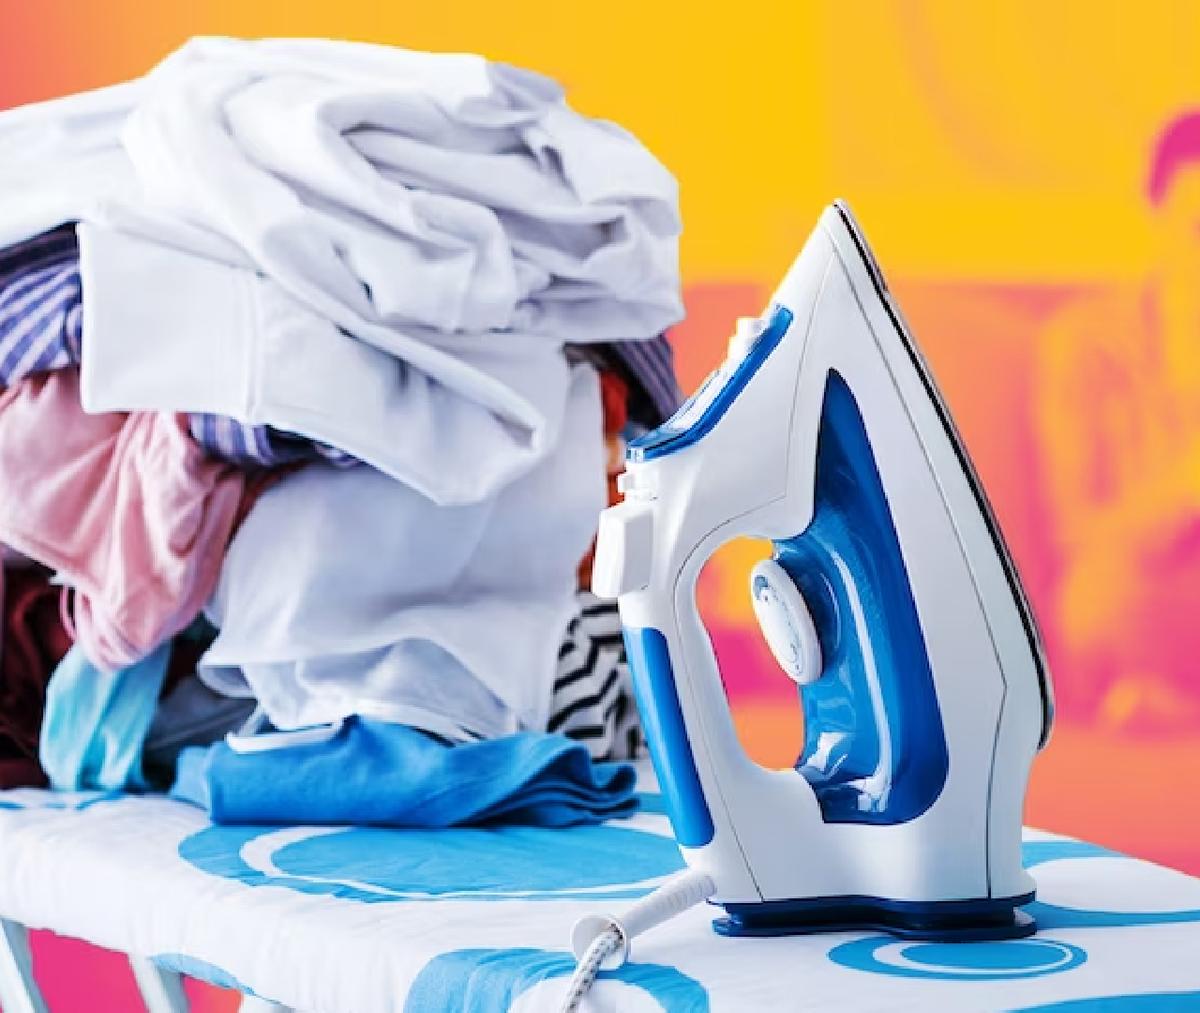 Clothes ironing